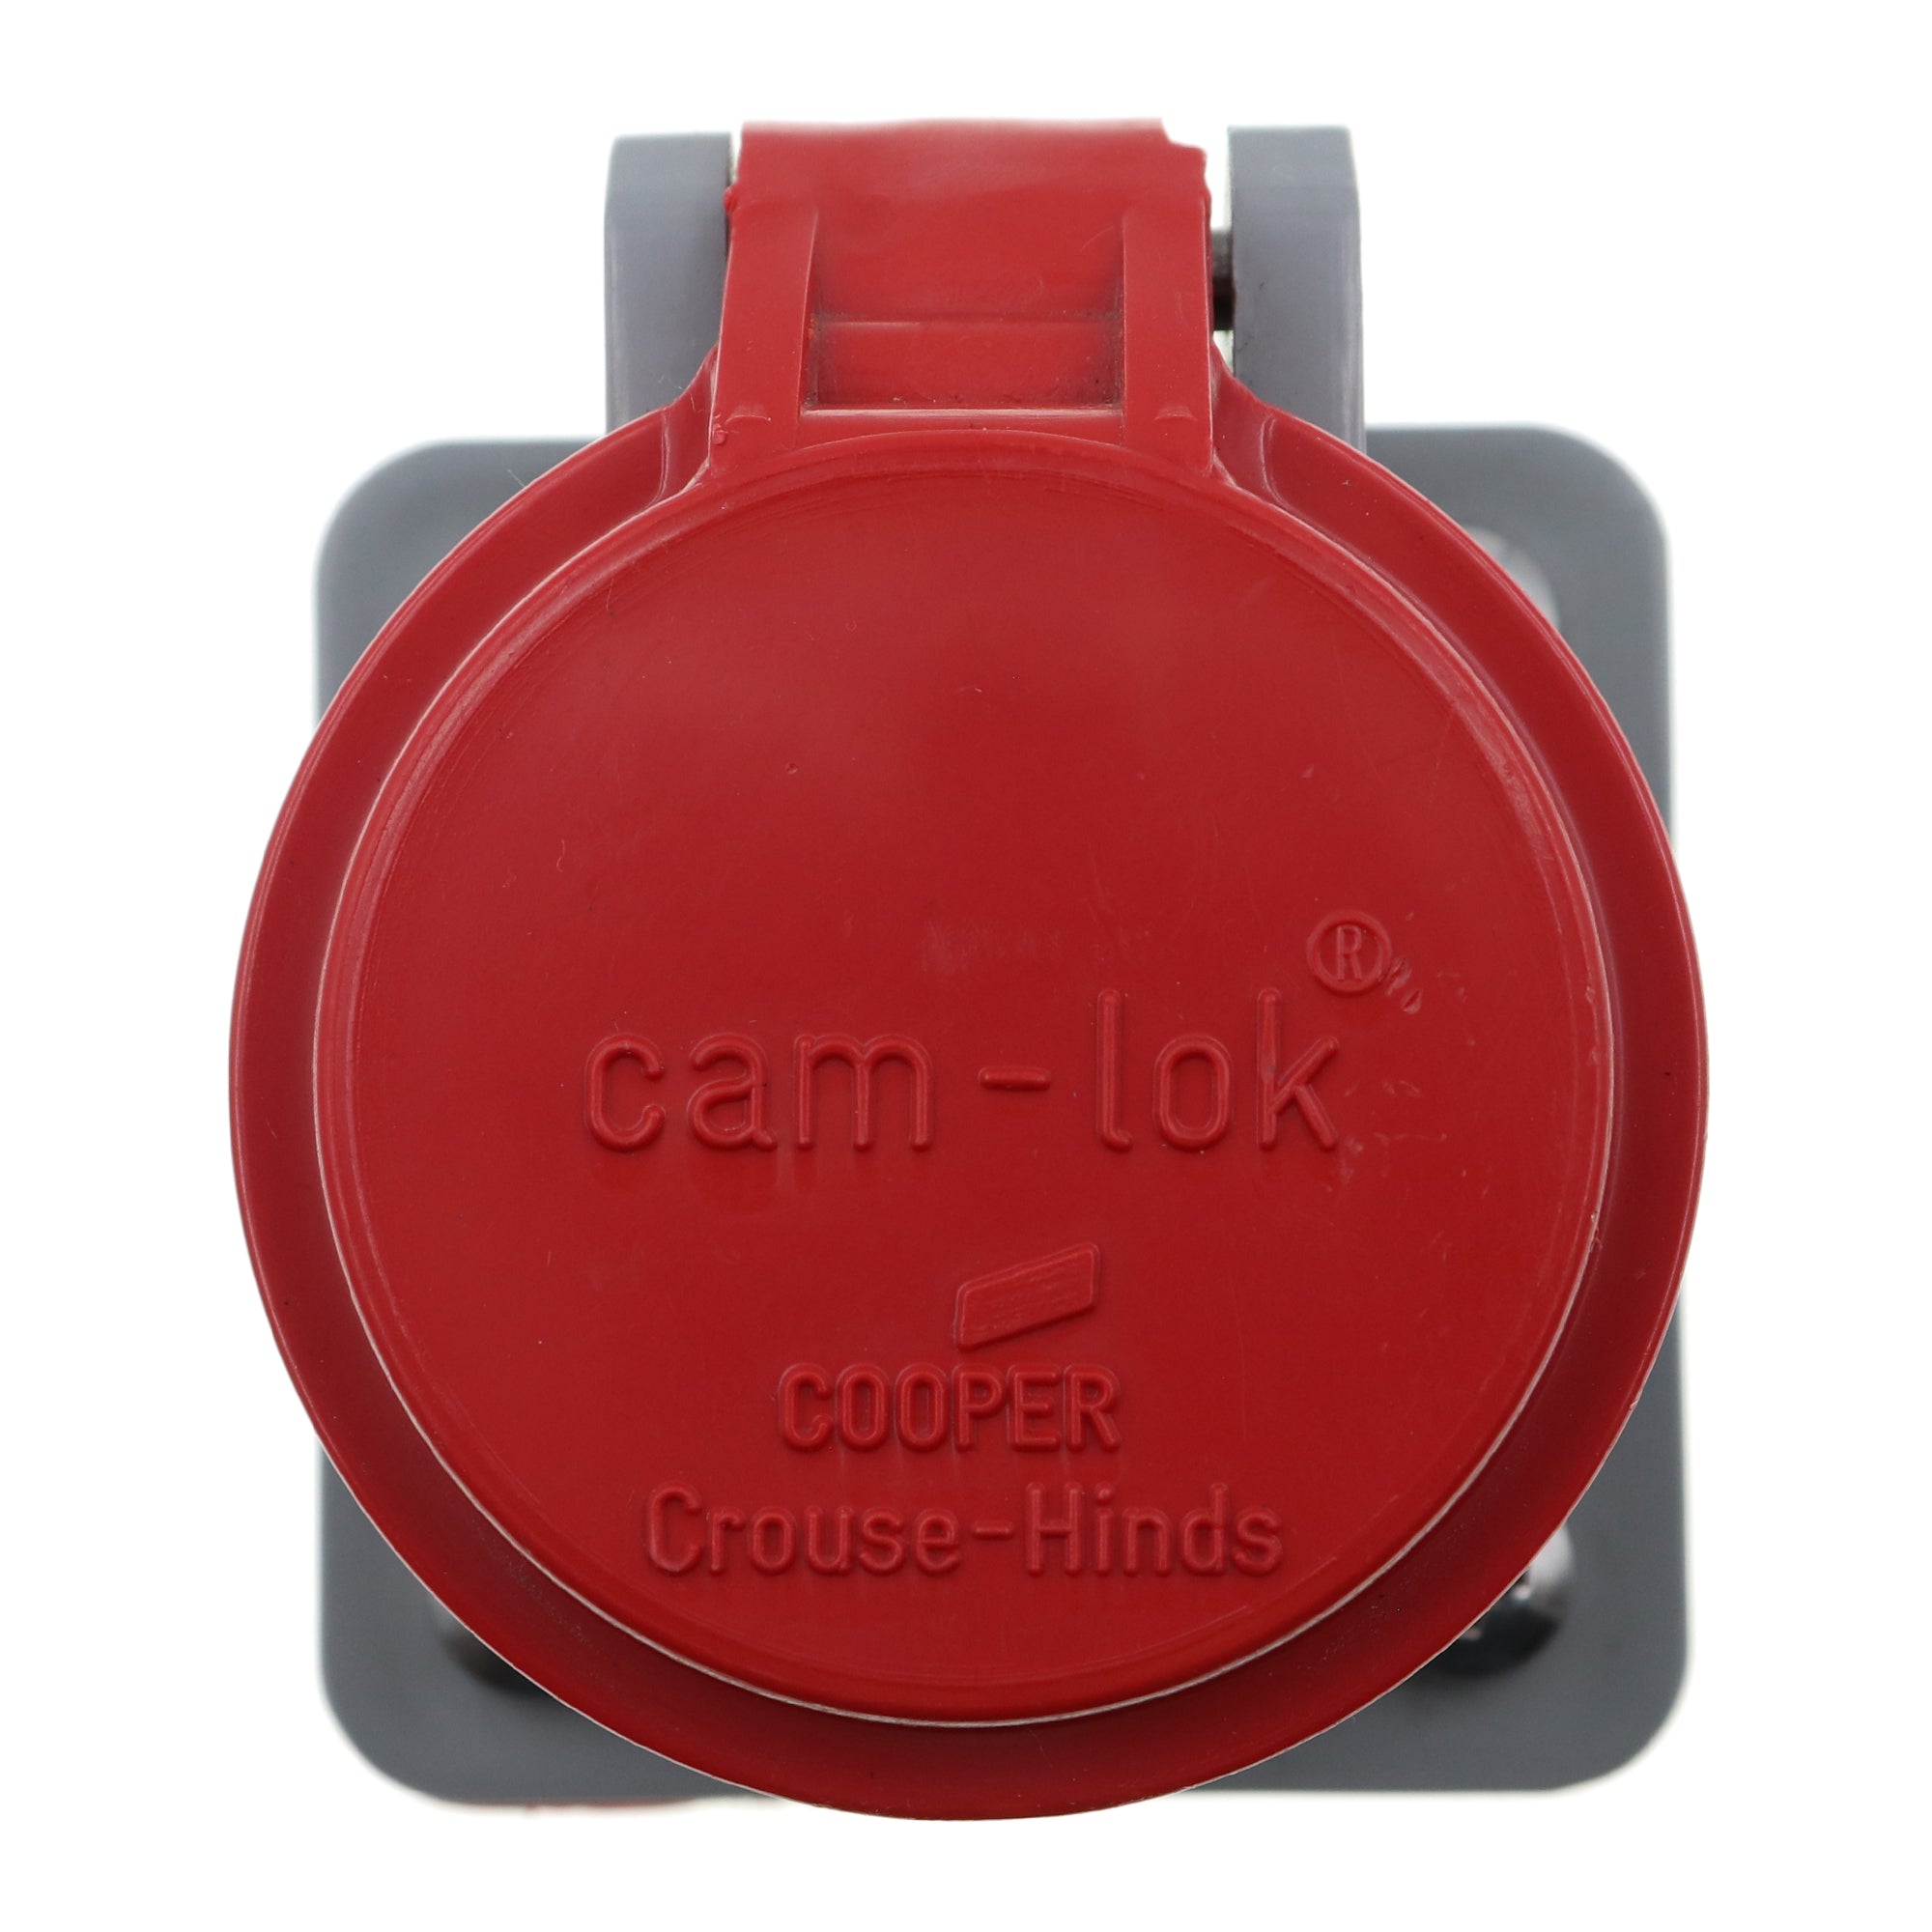 Crouse Hinds, CROUSE-HINDS E1016-1633 + E1016SC-36 J TYPE CAMLOCK FEMALE RECEPTACLE, 400A, RED